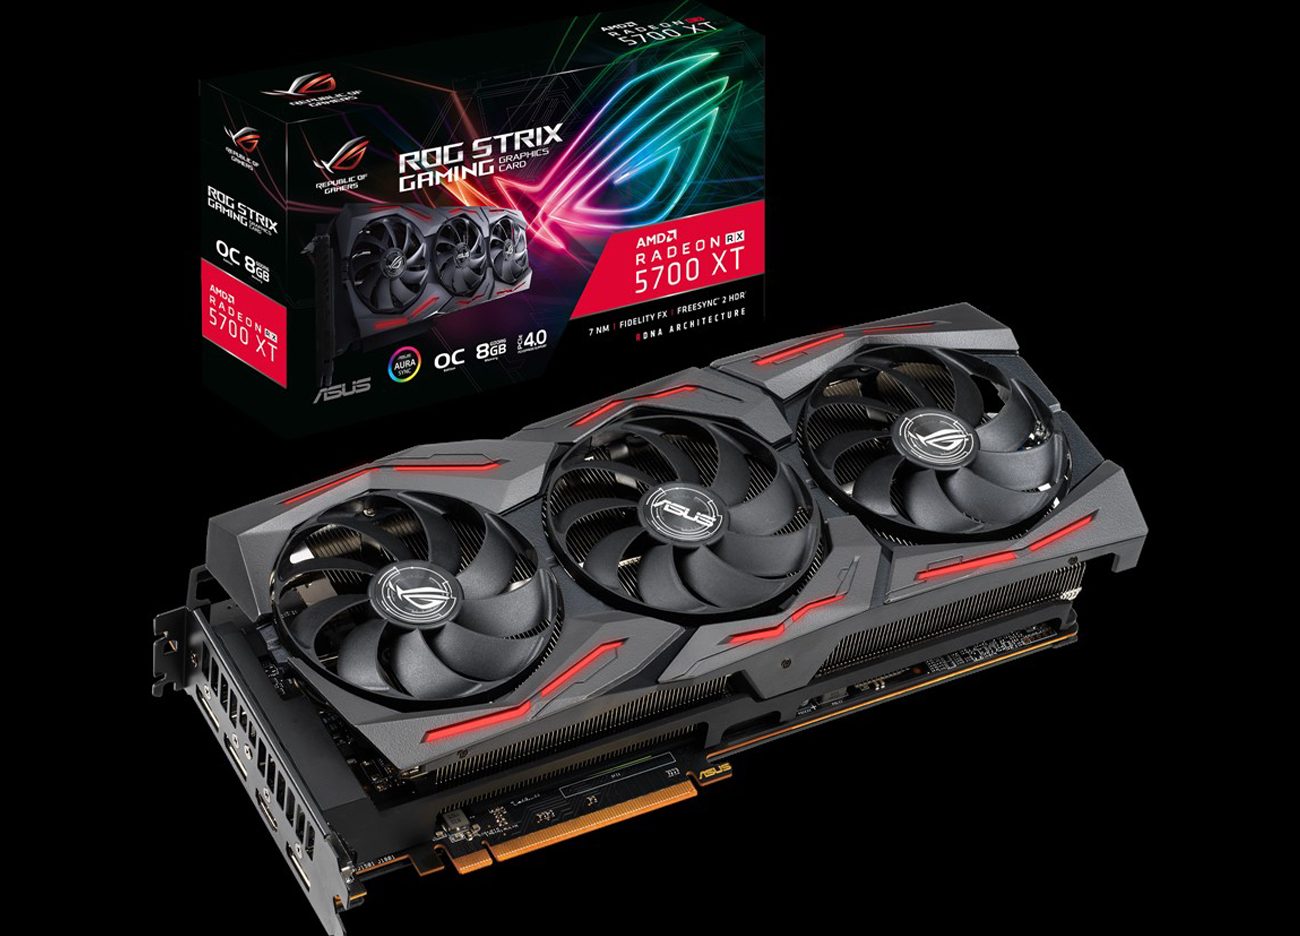 ASUS ROG STRIX RX 5700 XT O8G GAMING Review - Page 2 of 13 - The 